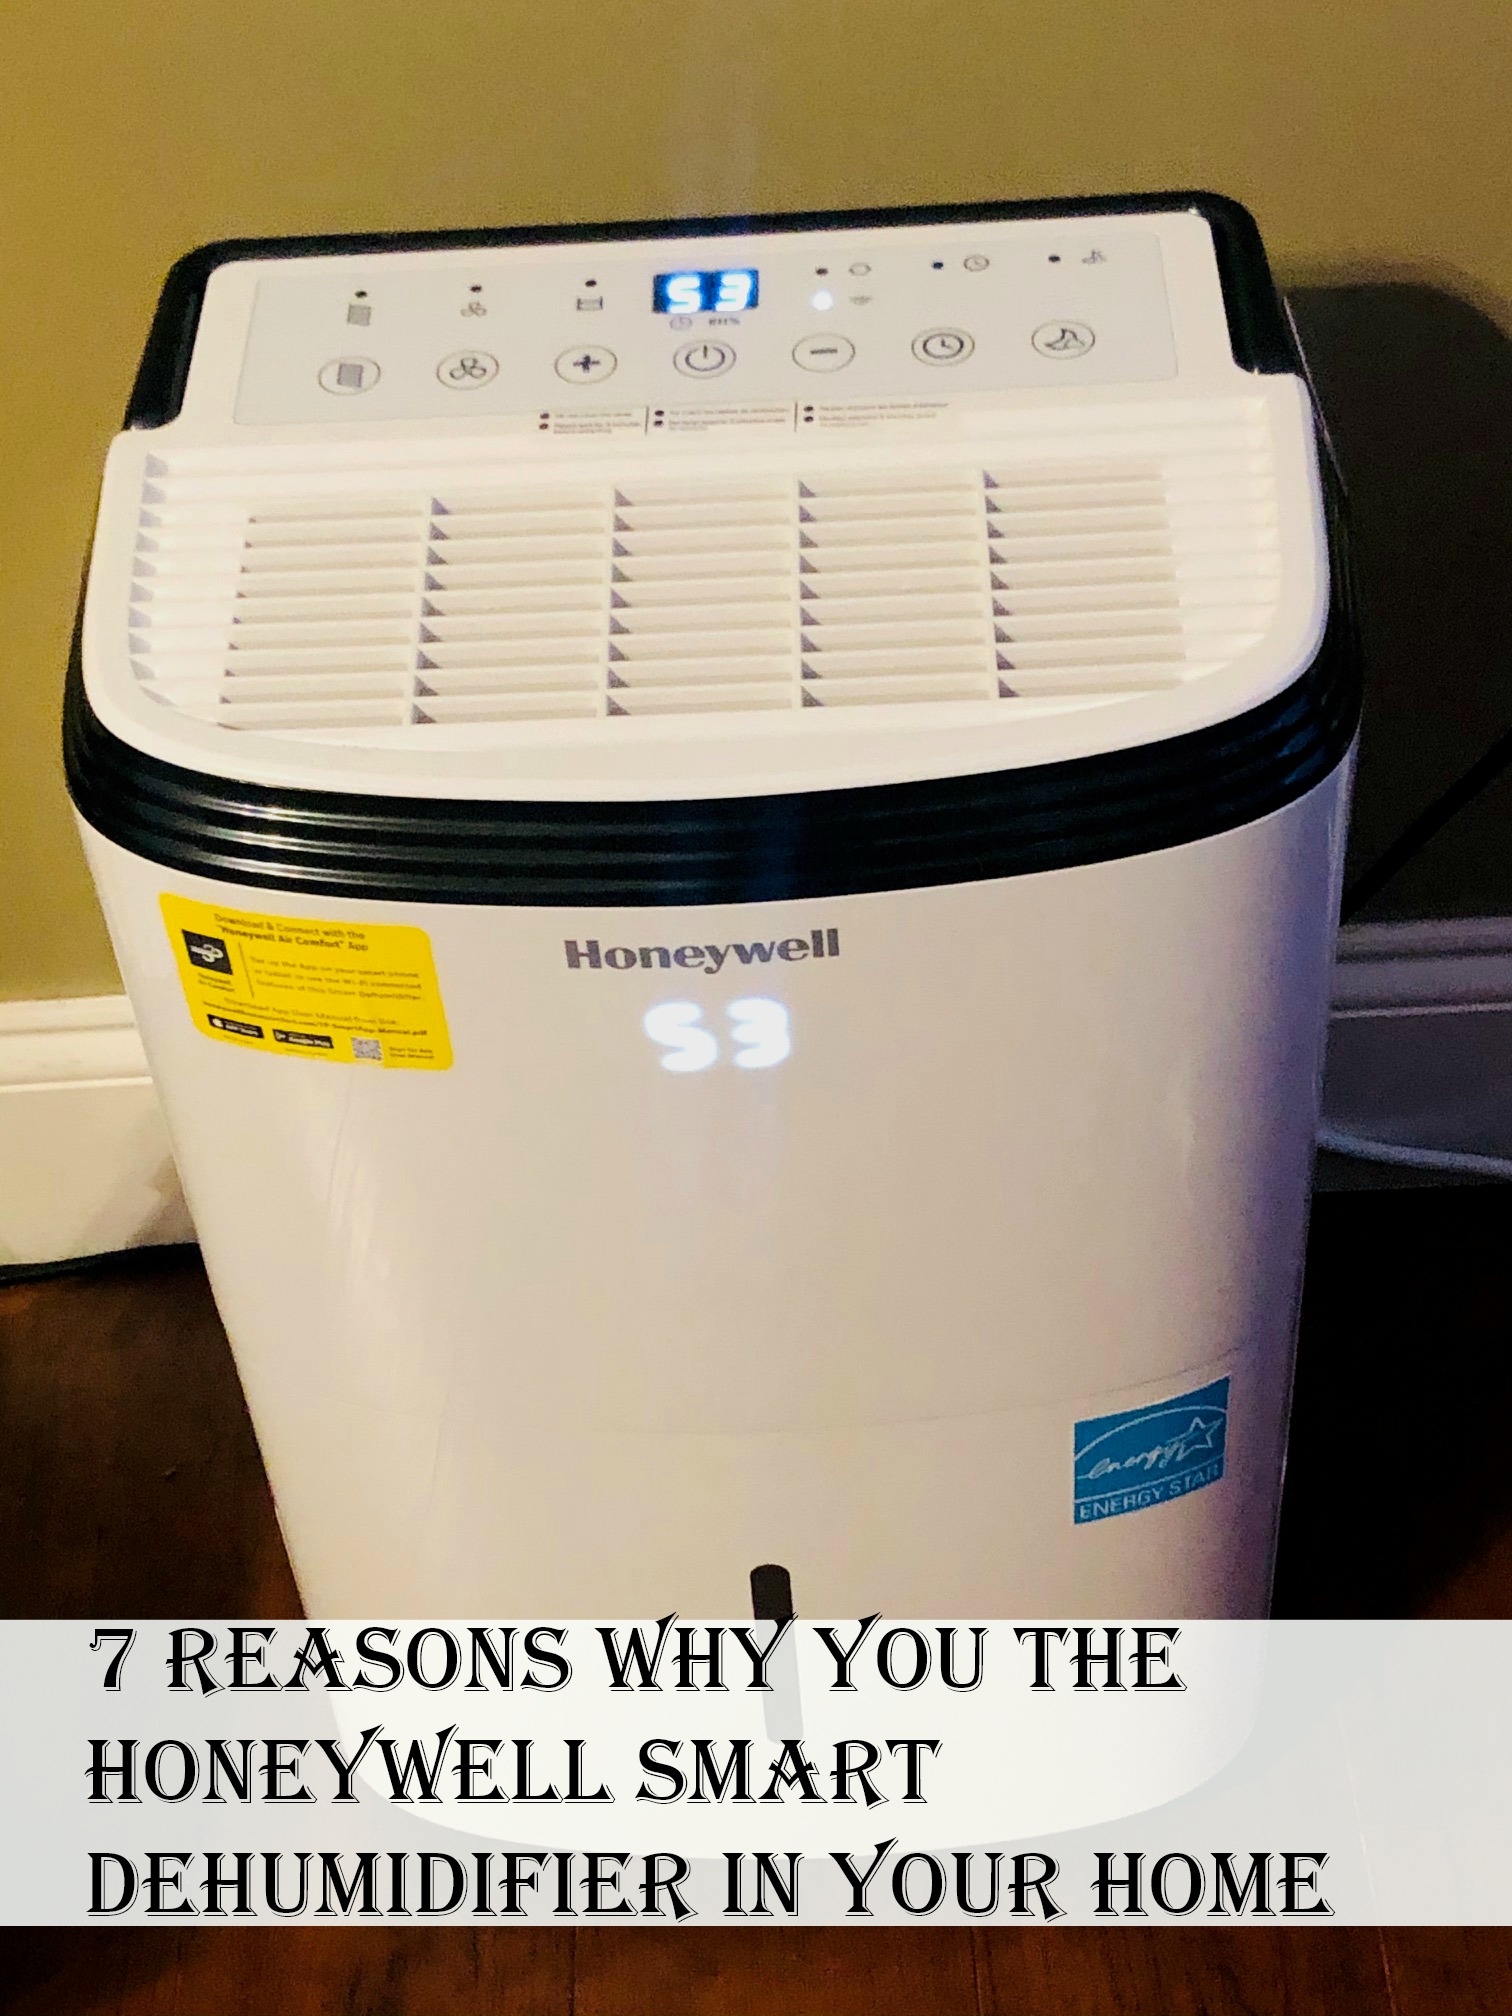 7 Reasons Why You the Honeywell Smart Dehumidifier in Your Home